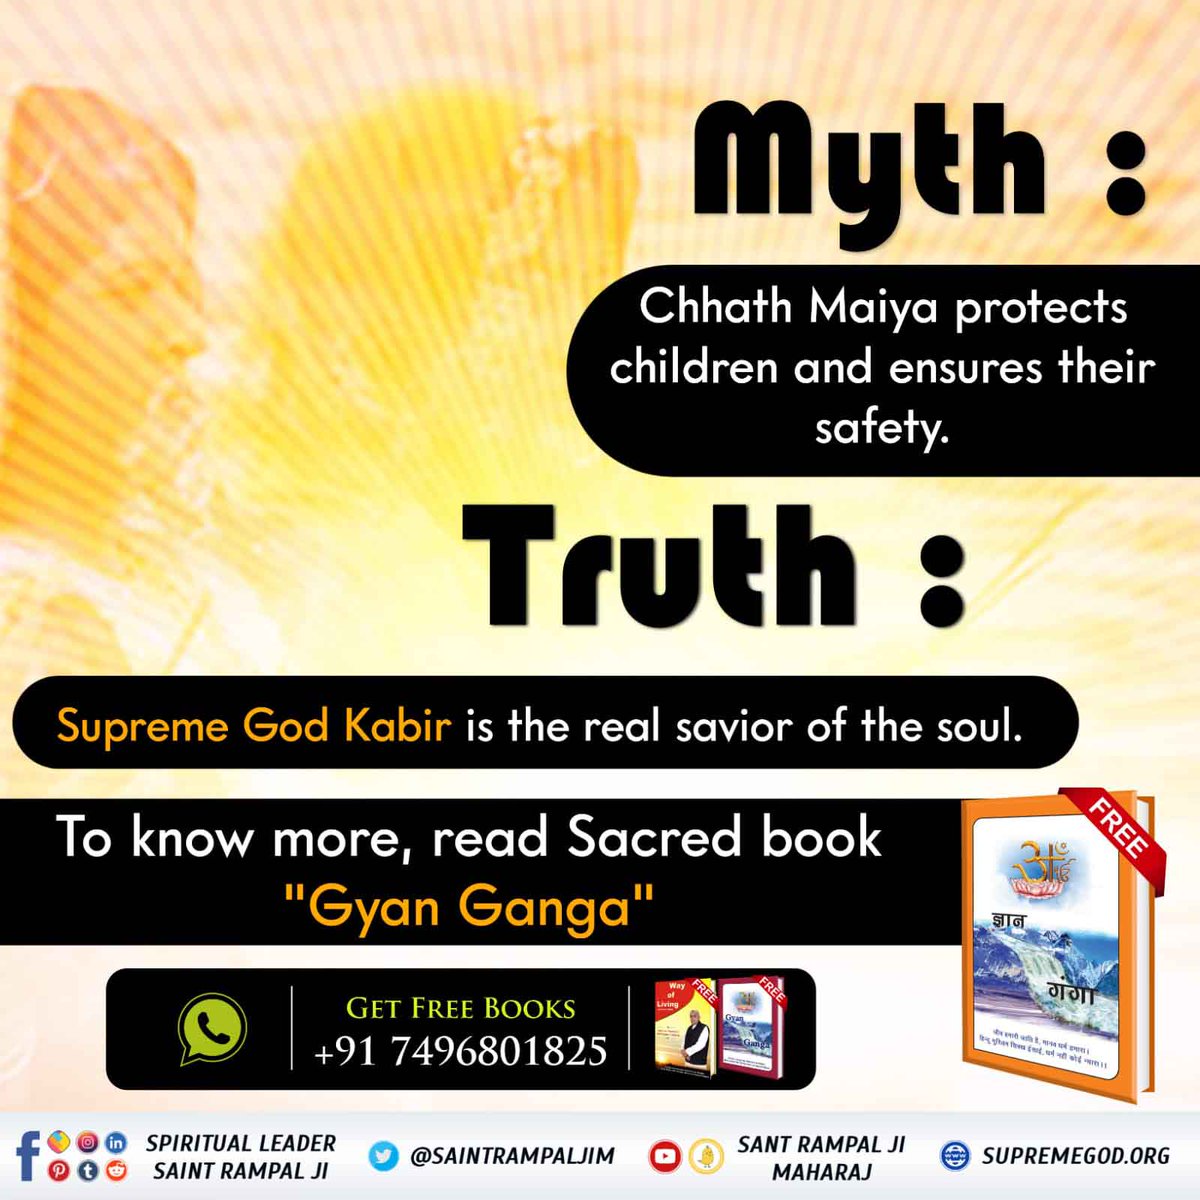 Chhath pooja cannot protect children and ensure their safety, Only Supreme God kabir is the real savior of the soul. To #KnowAboutChhathPuja 💠must read Book Gyan Ganga